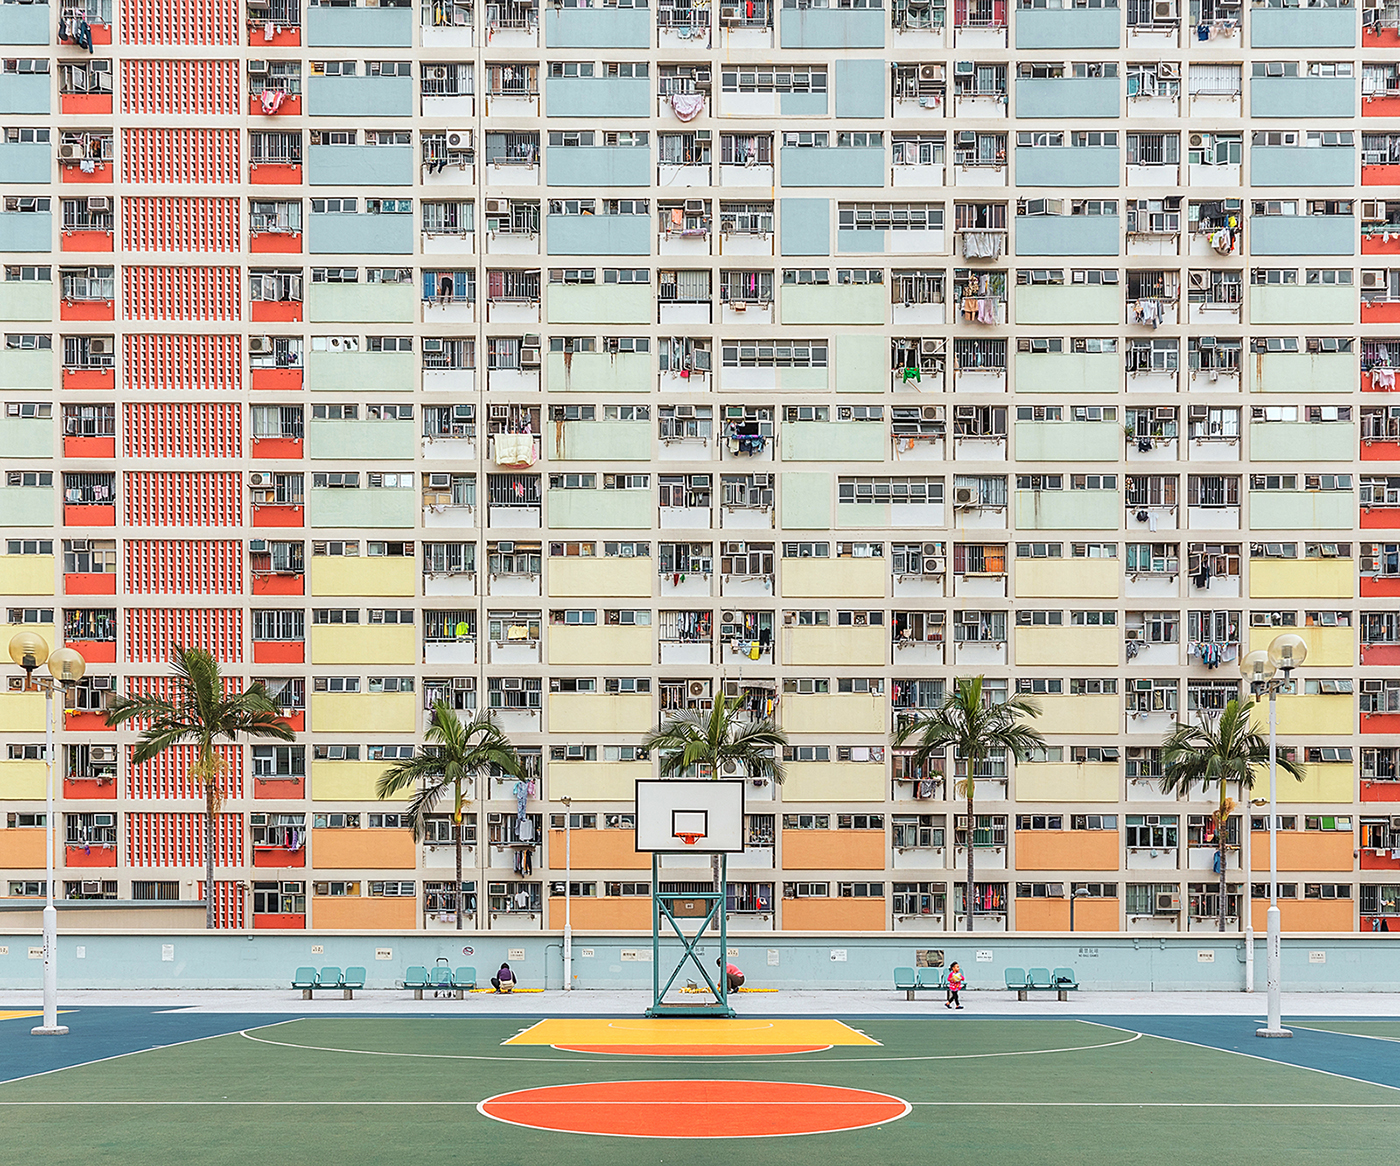 Digital Photography of Hong Kong by Ludwig Favre